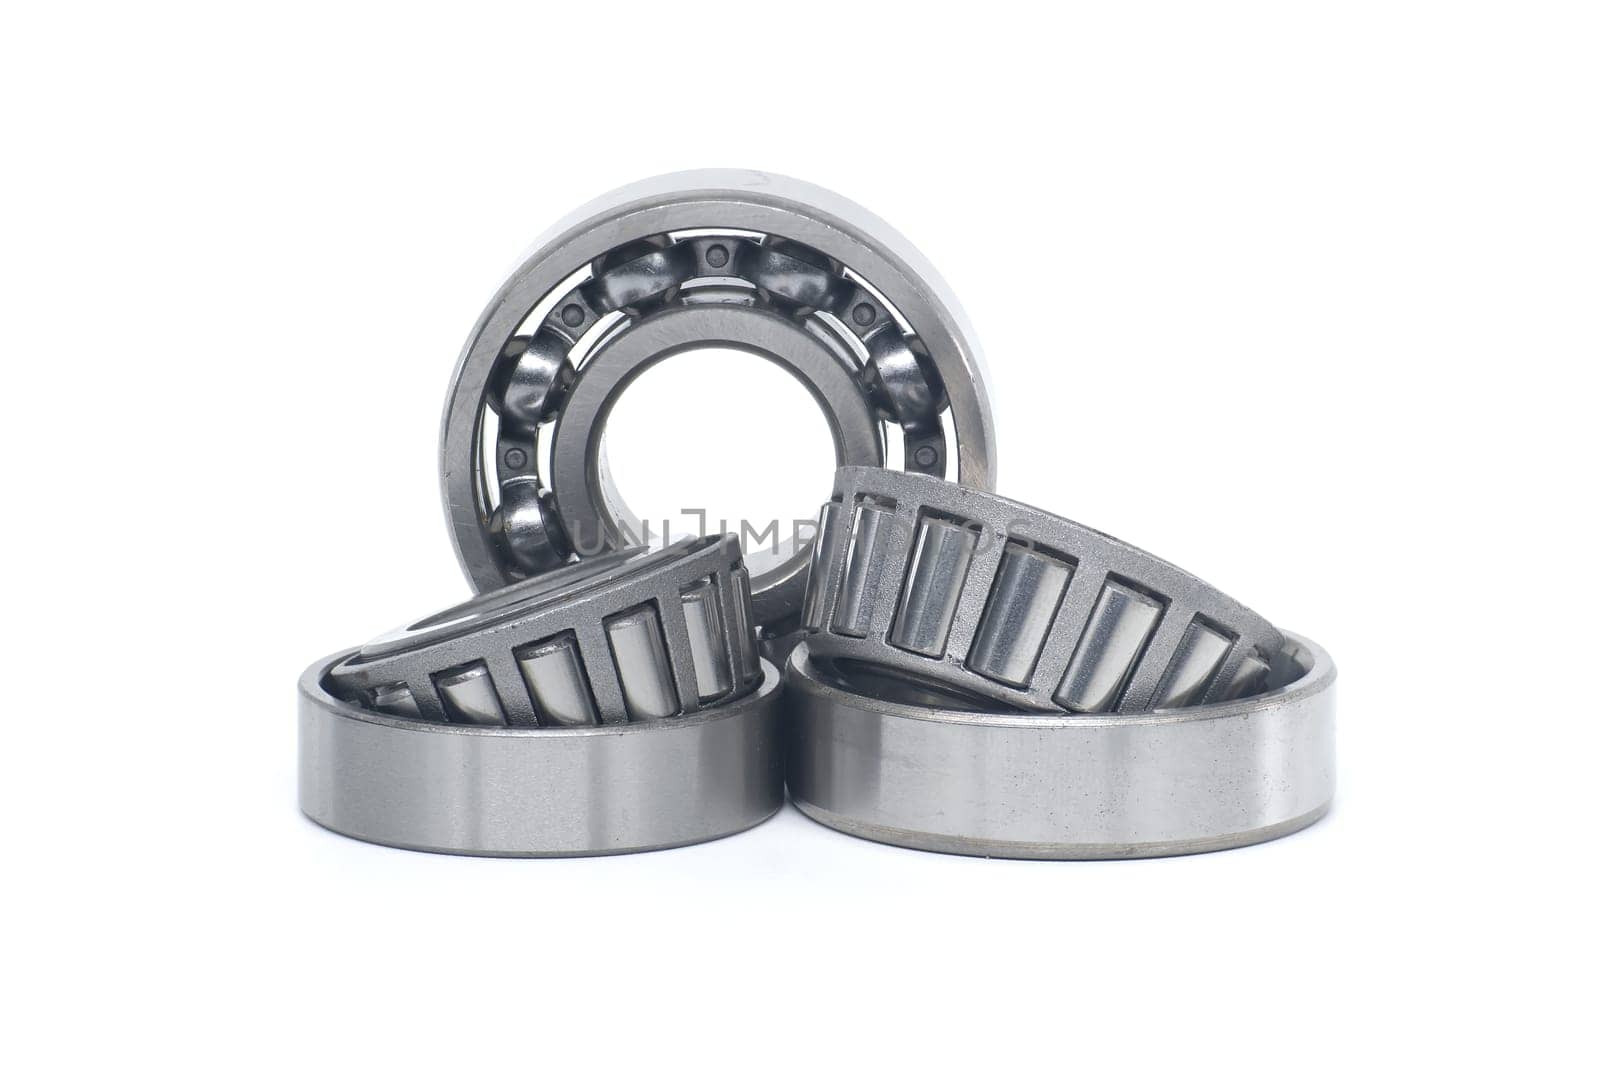 Single row tapered roller bearings and deep groove ball bearing without seal isolated on white background. Spare parts for machinery and automotive industry